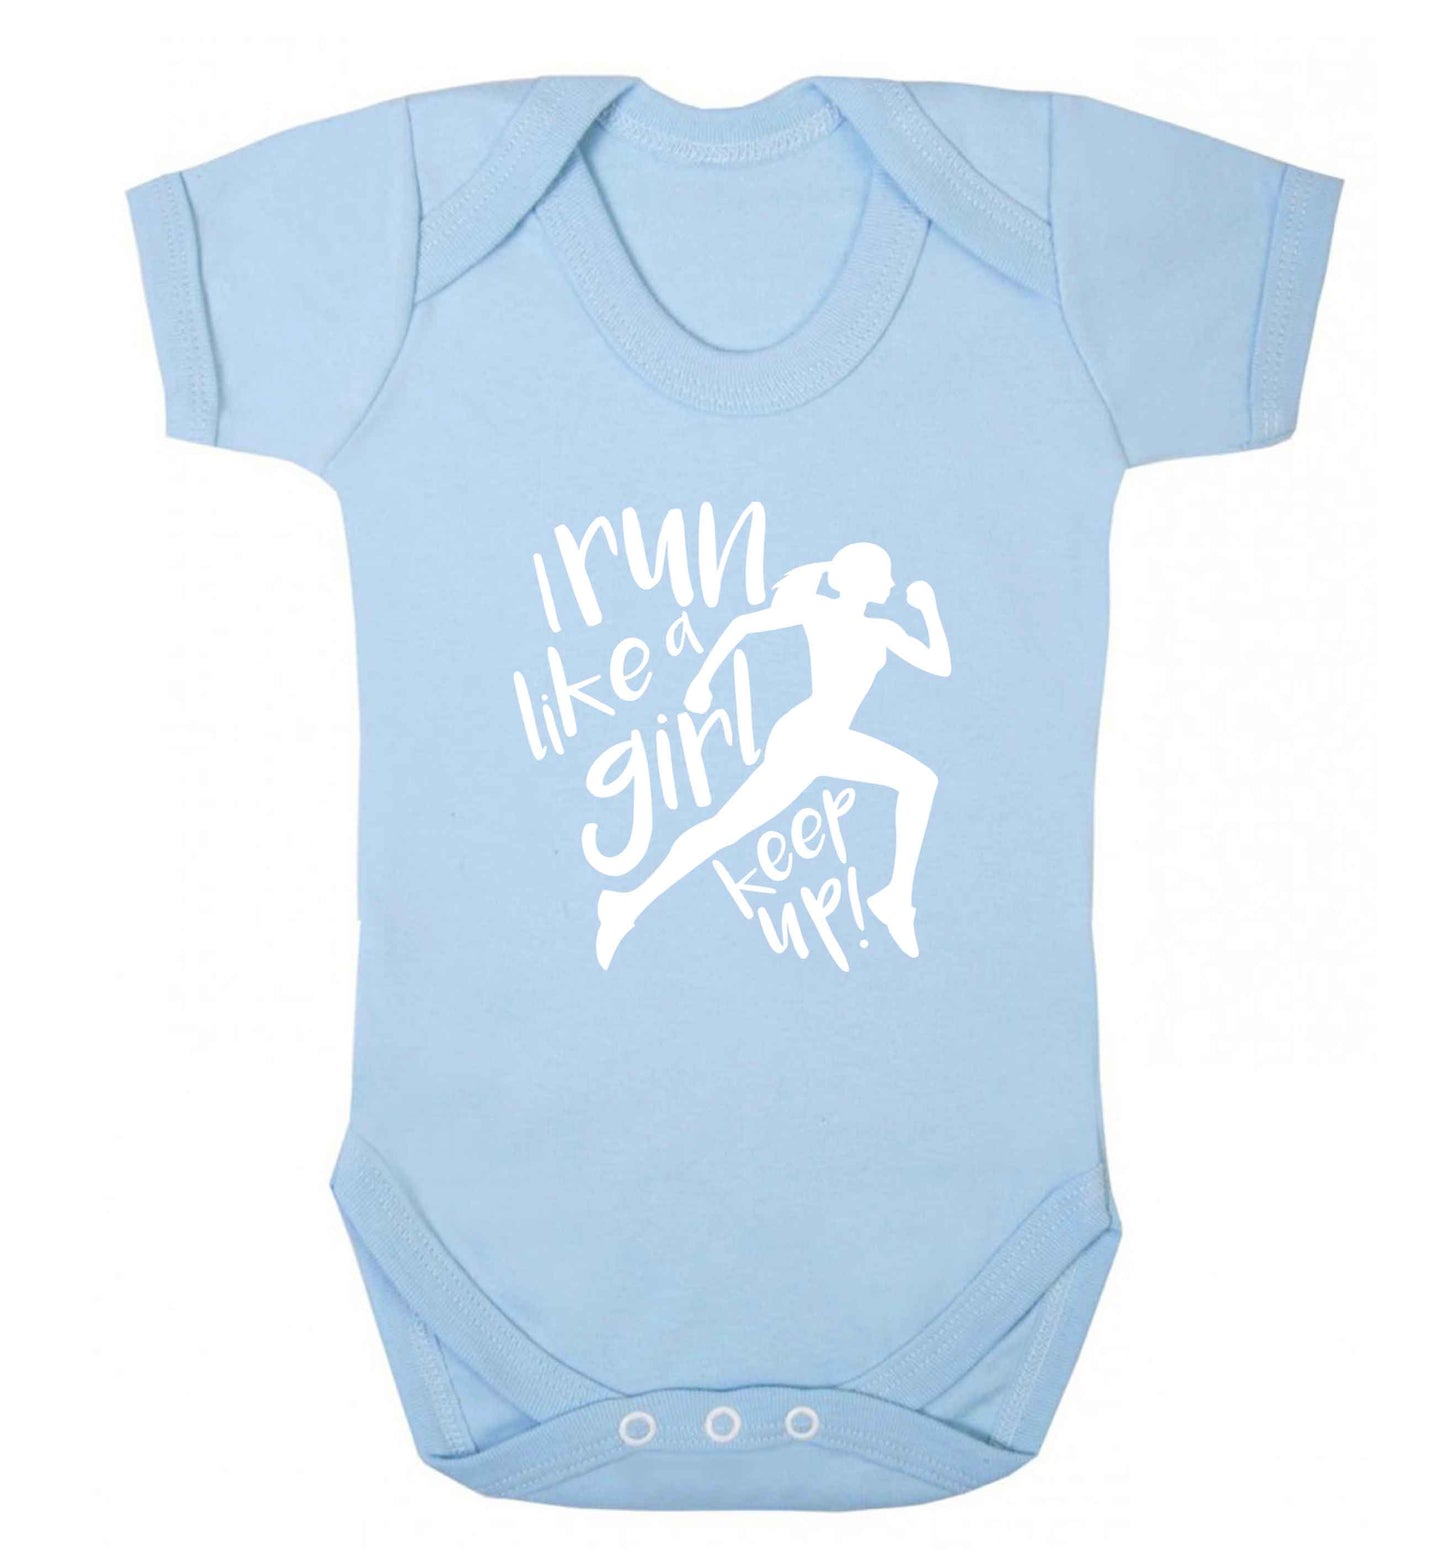 I run like a girl, keep up! baby vest pale blue 18-24 months